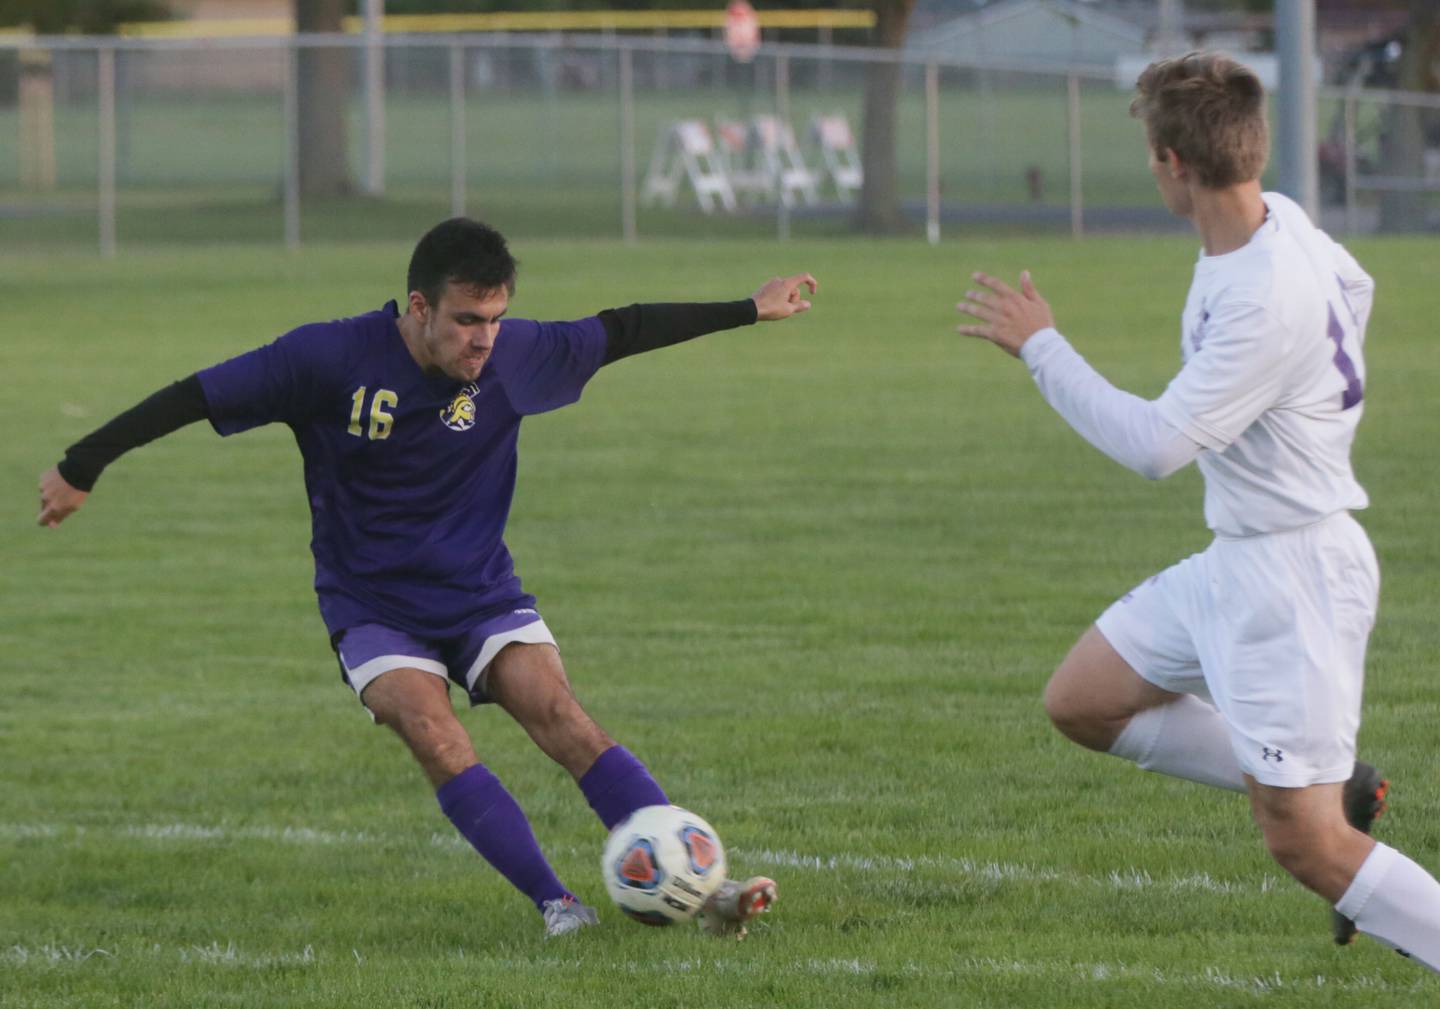 Mendota's Ricky Orozco (16) kicks the ball away from Peoria Christian's Caleb Forseth (18) in the Class 1A Sectional semifinal game in Chillicothe on Tuesday Oct. 19, 2021.